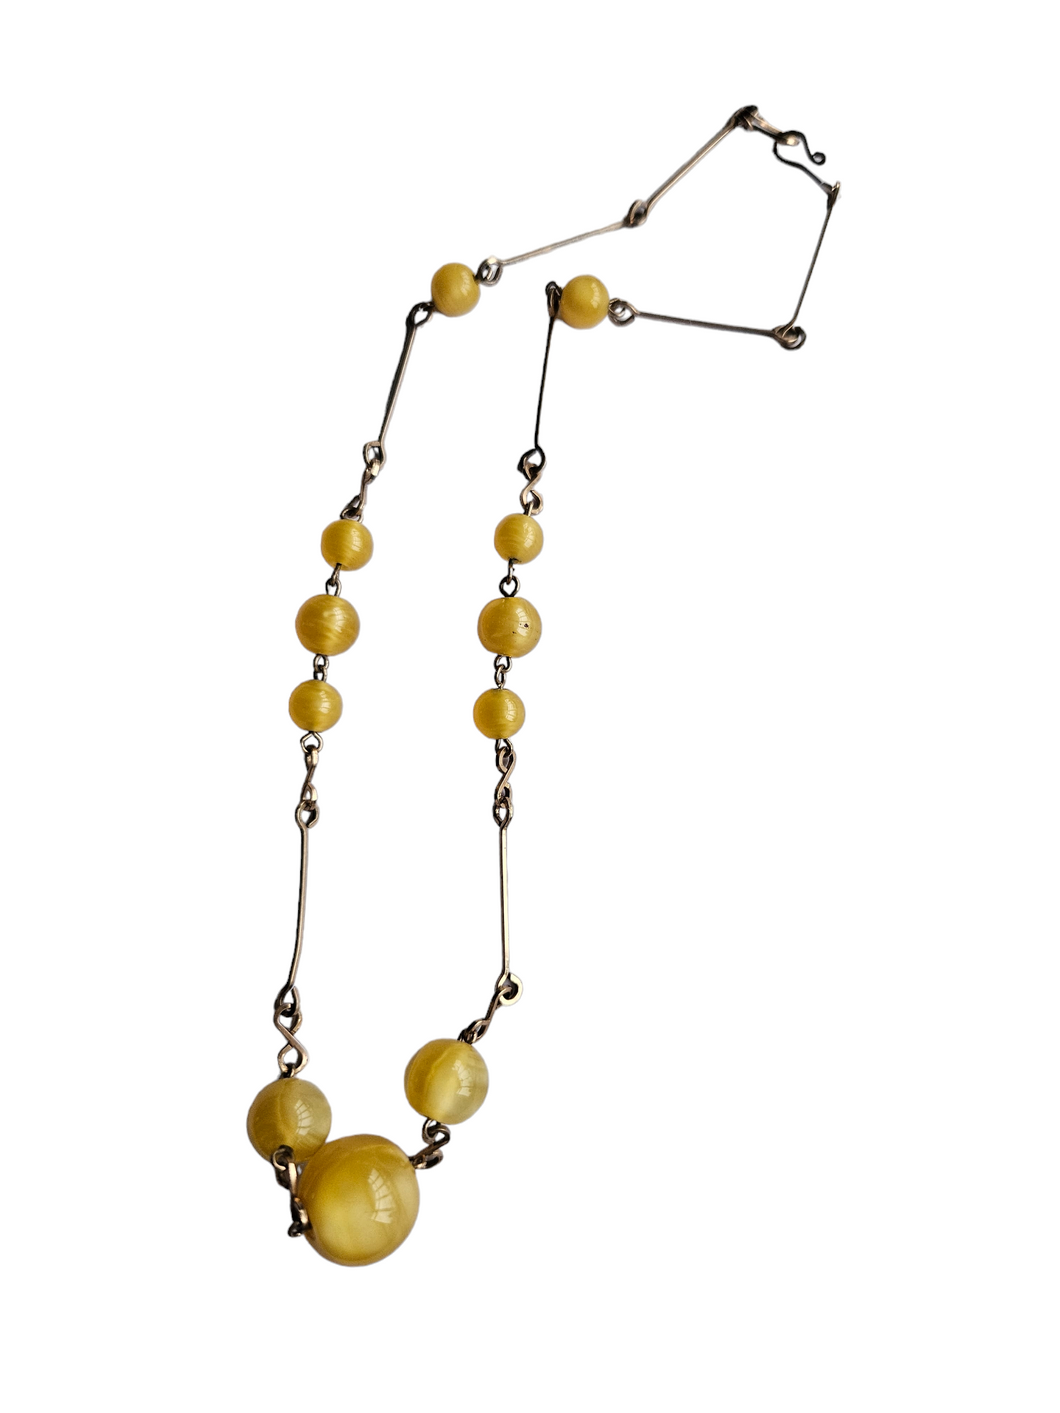 1930s Deco Yellow Satin Glass and Rolled Wire Necklace